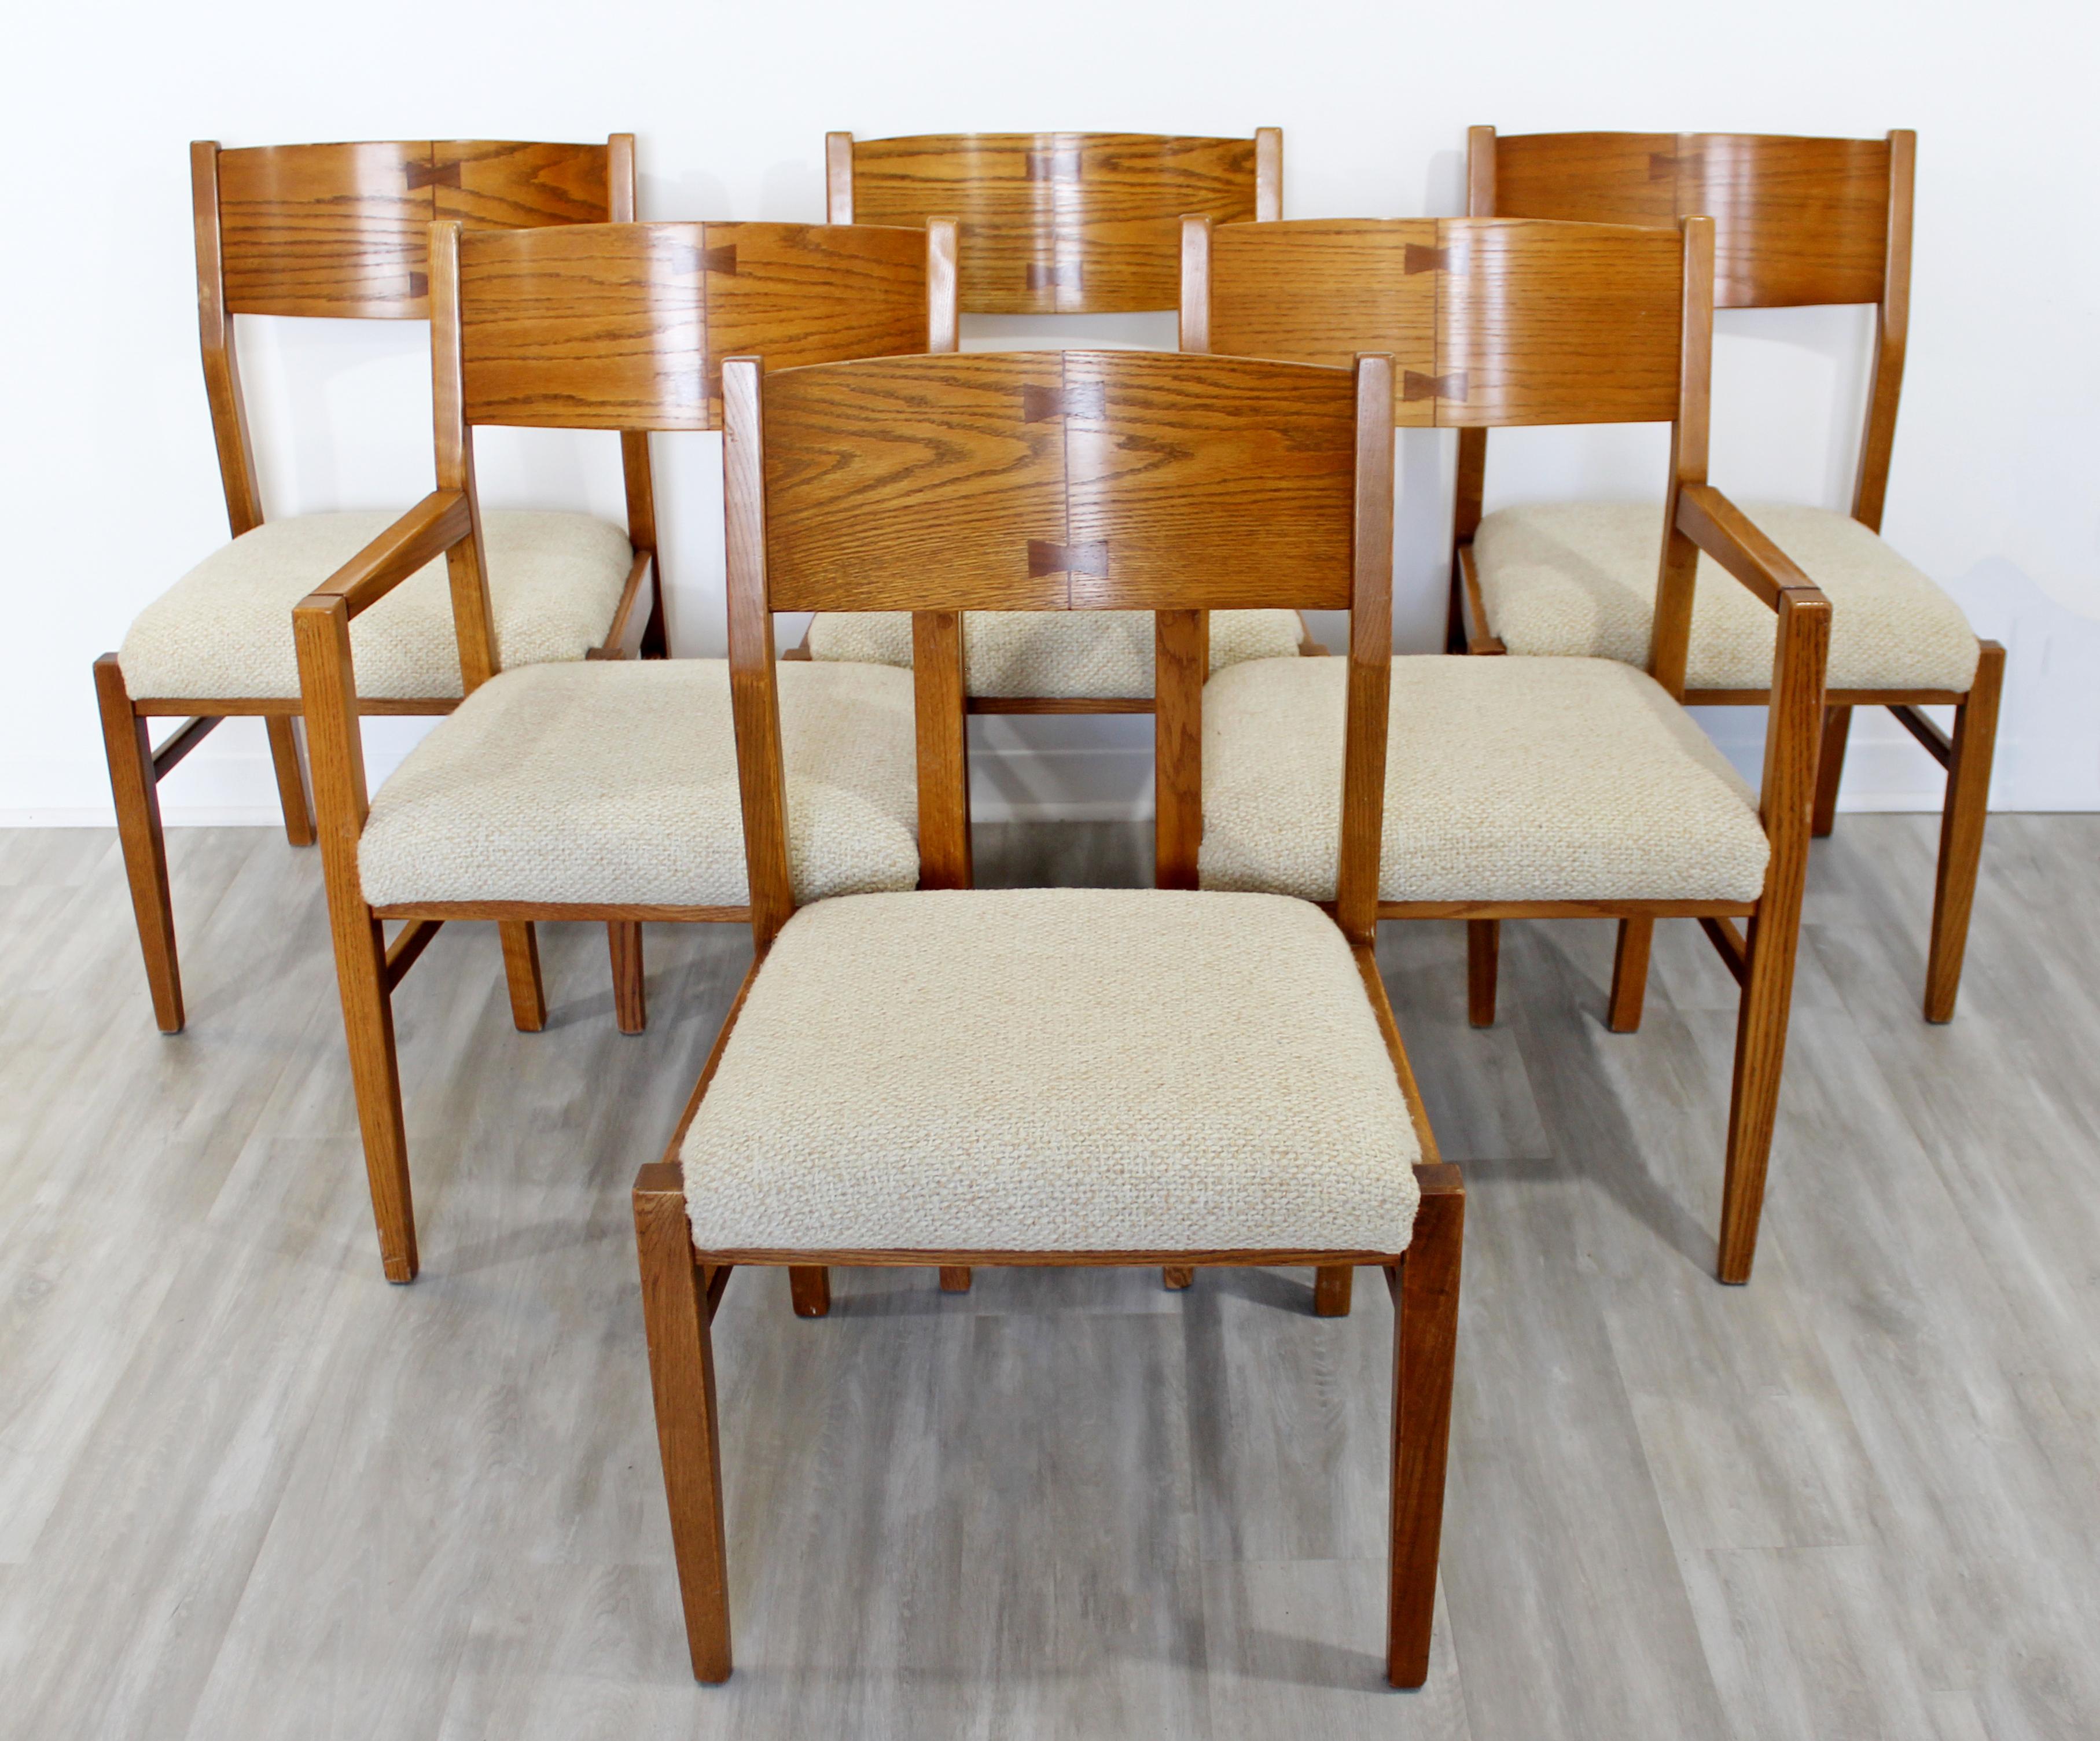 For your consideration is a gorgeous set of six, curved back, dining side and armchairs, designed by Russell Wright for Conant Ball, circa 1970. In very good vintage condition. The dimensions are 22